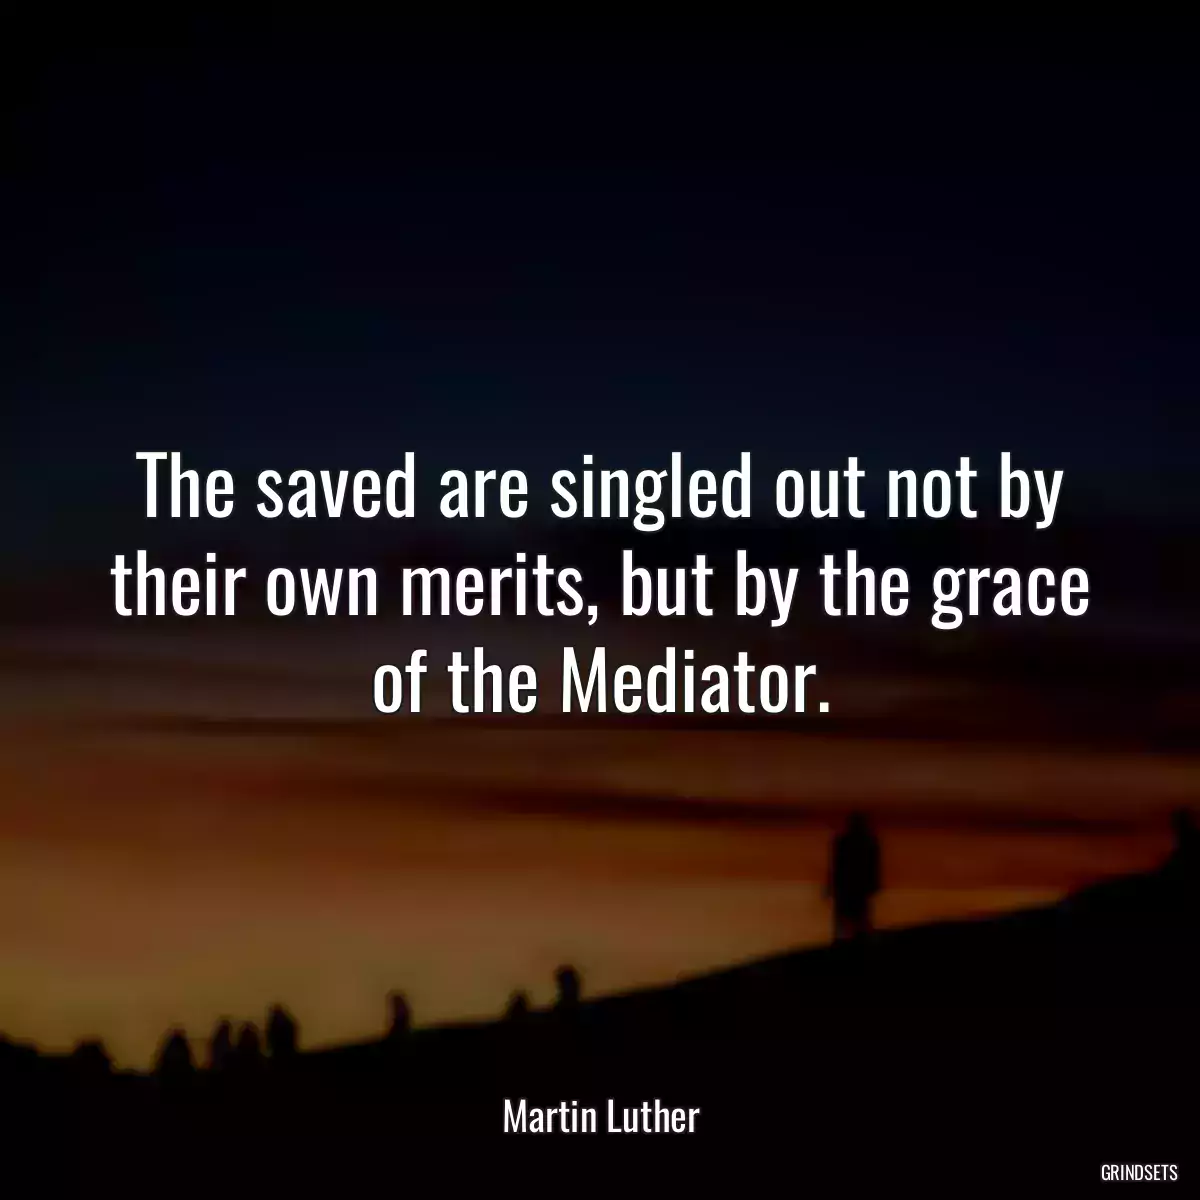 The saved are singled out not by their own merits, but by the grace of the Mediator.